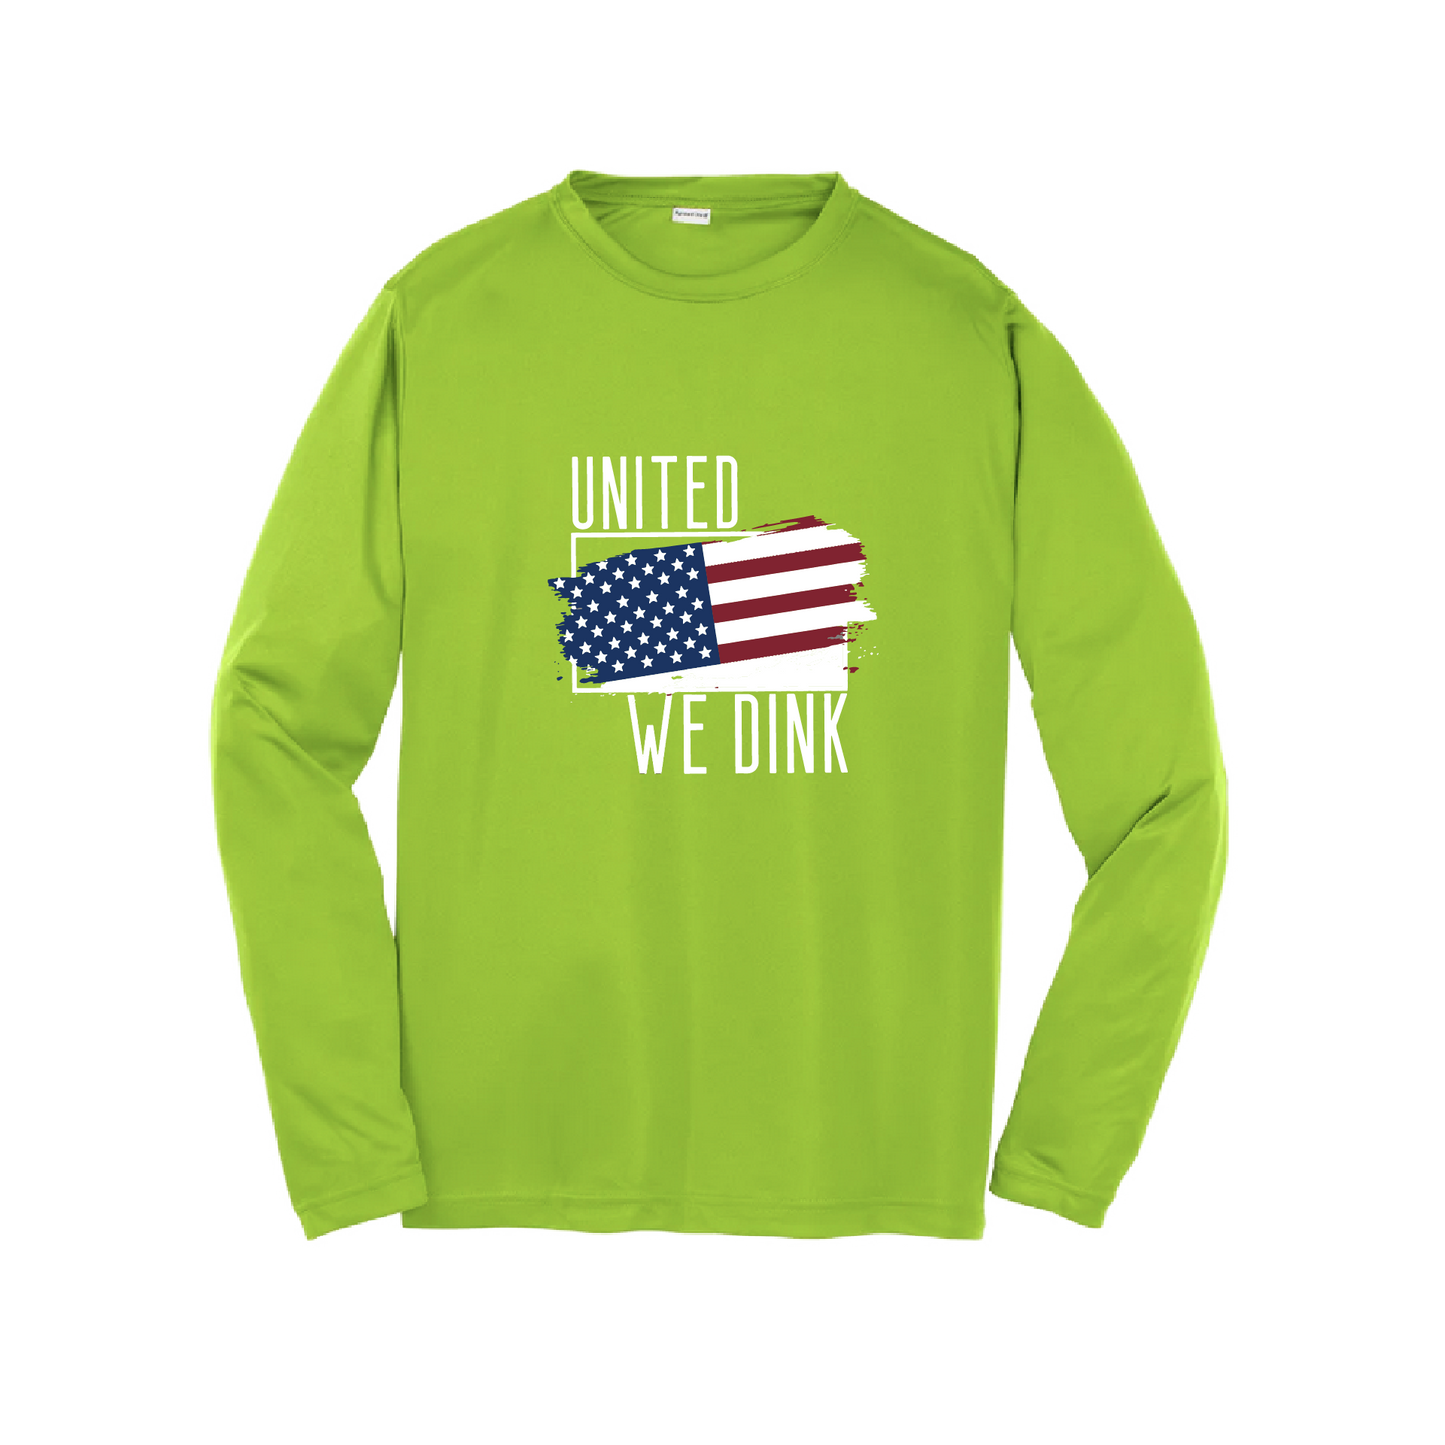 Pickleball Design: United We Dink  Youth Styles: Long Sleeve  Shirts are lightweight, roomy and highly breathable. These moisture-wicking shirts are designed for athletic performance. They feature PosiCharge technology to lock in color and prevent logos from fading. Removable tag and set-in sleeves for comfort.